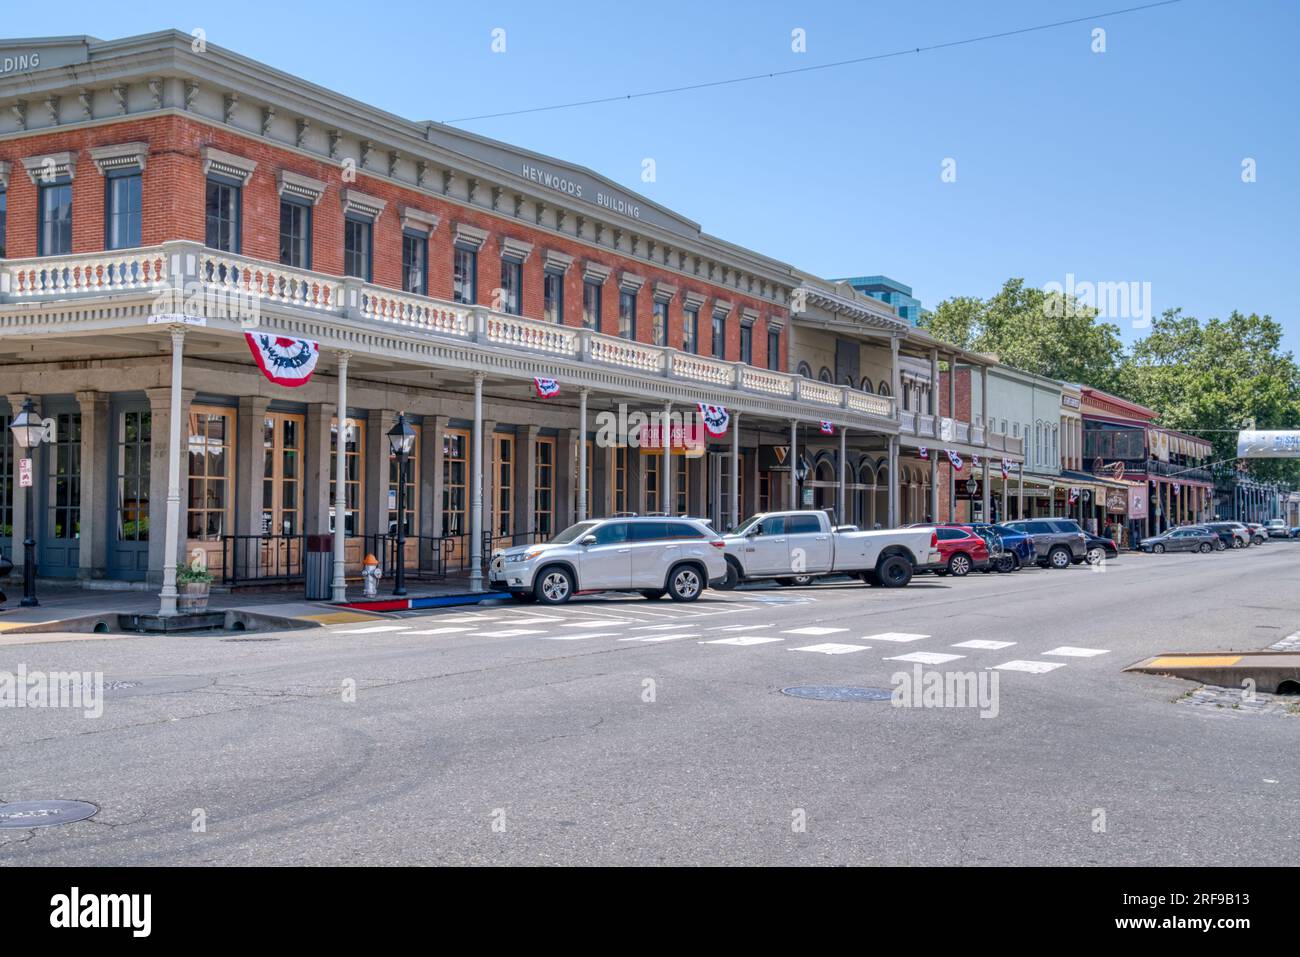 Sacramento, CA - May 25, 2023: Historic buildings line the street in Old Town Sacremento located near the waterfront of the city of Sacremento, Califo Stock Photo